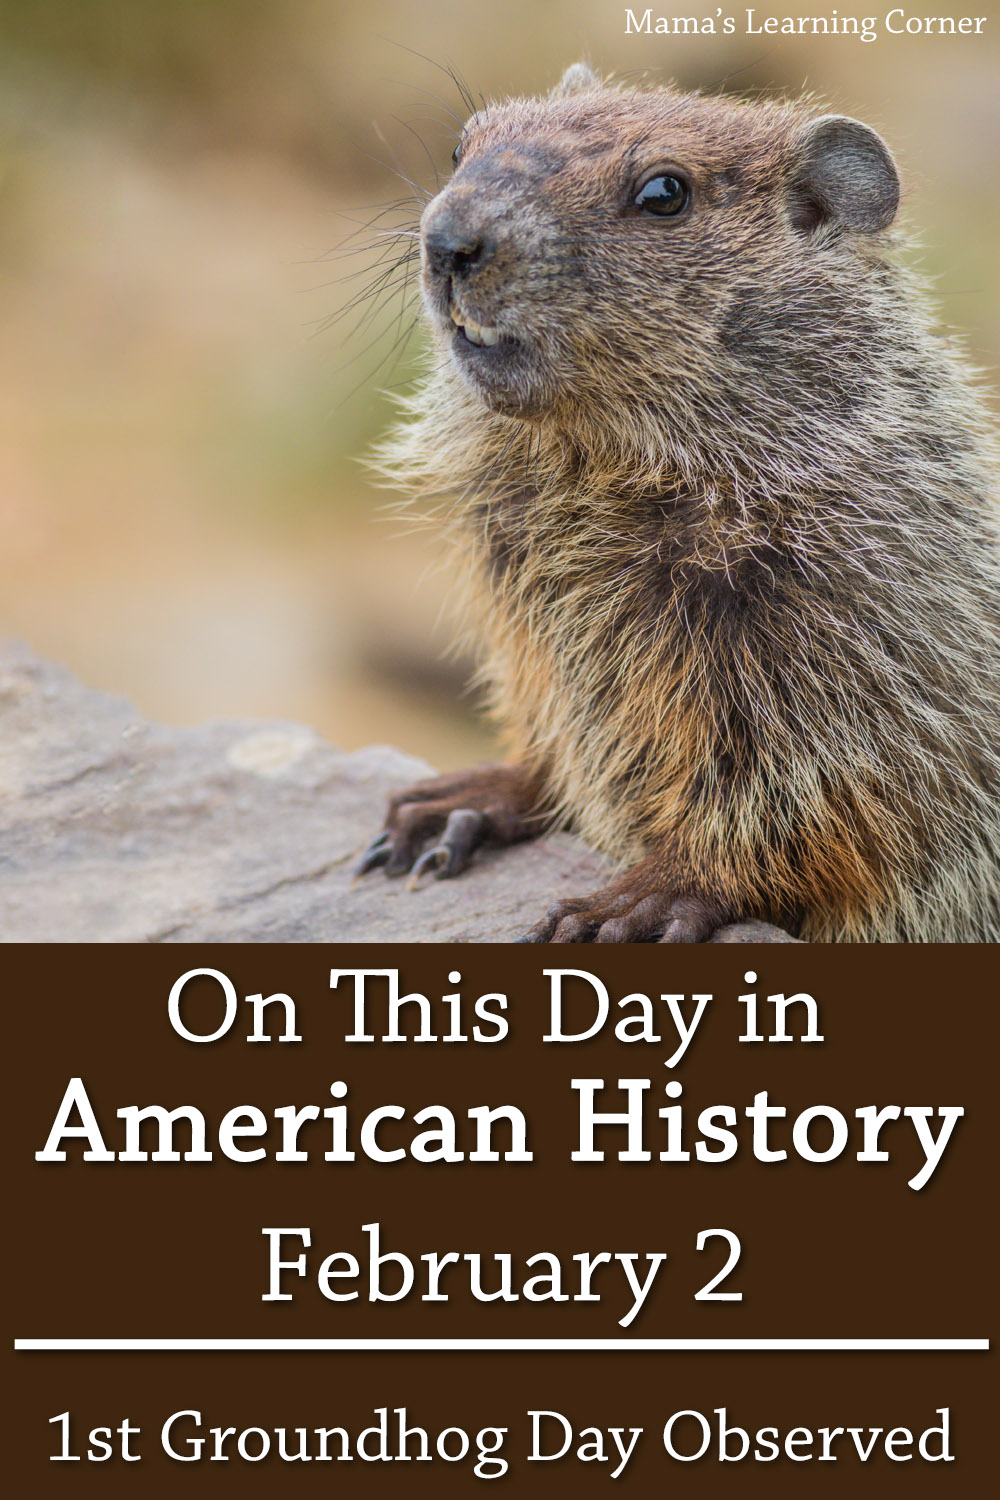 On This Day in American History February 2 First Groundhog Day is